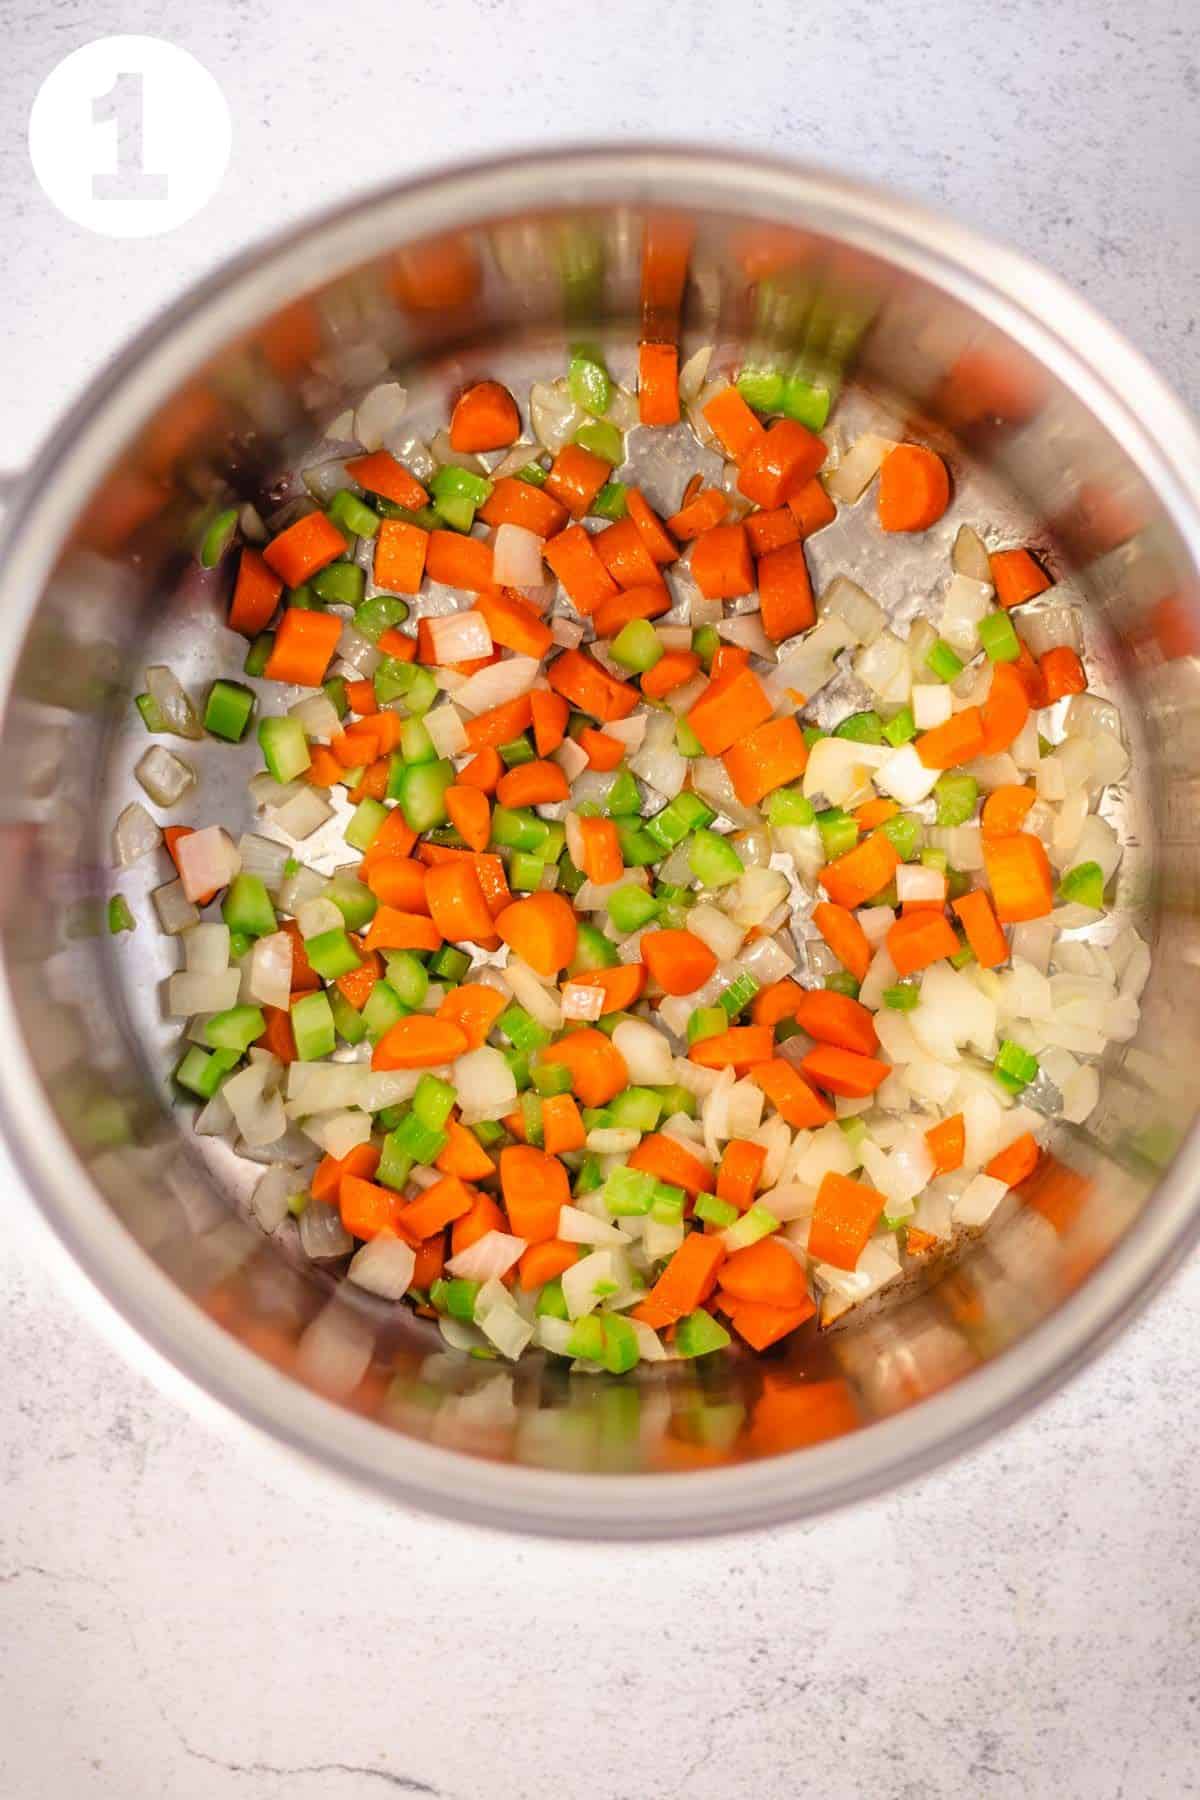 Large soup pot with diced onion, carrot and celery. Labeled with a "1" in the upper left corner.